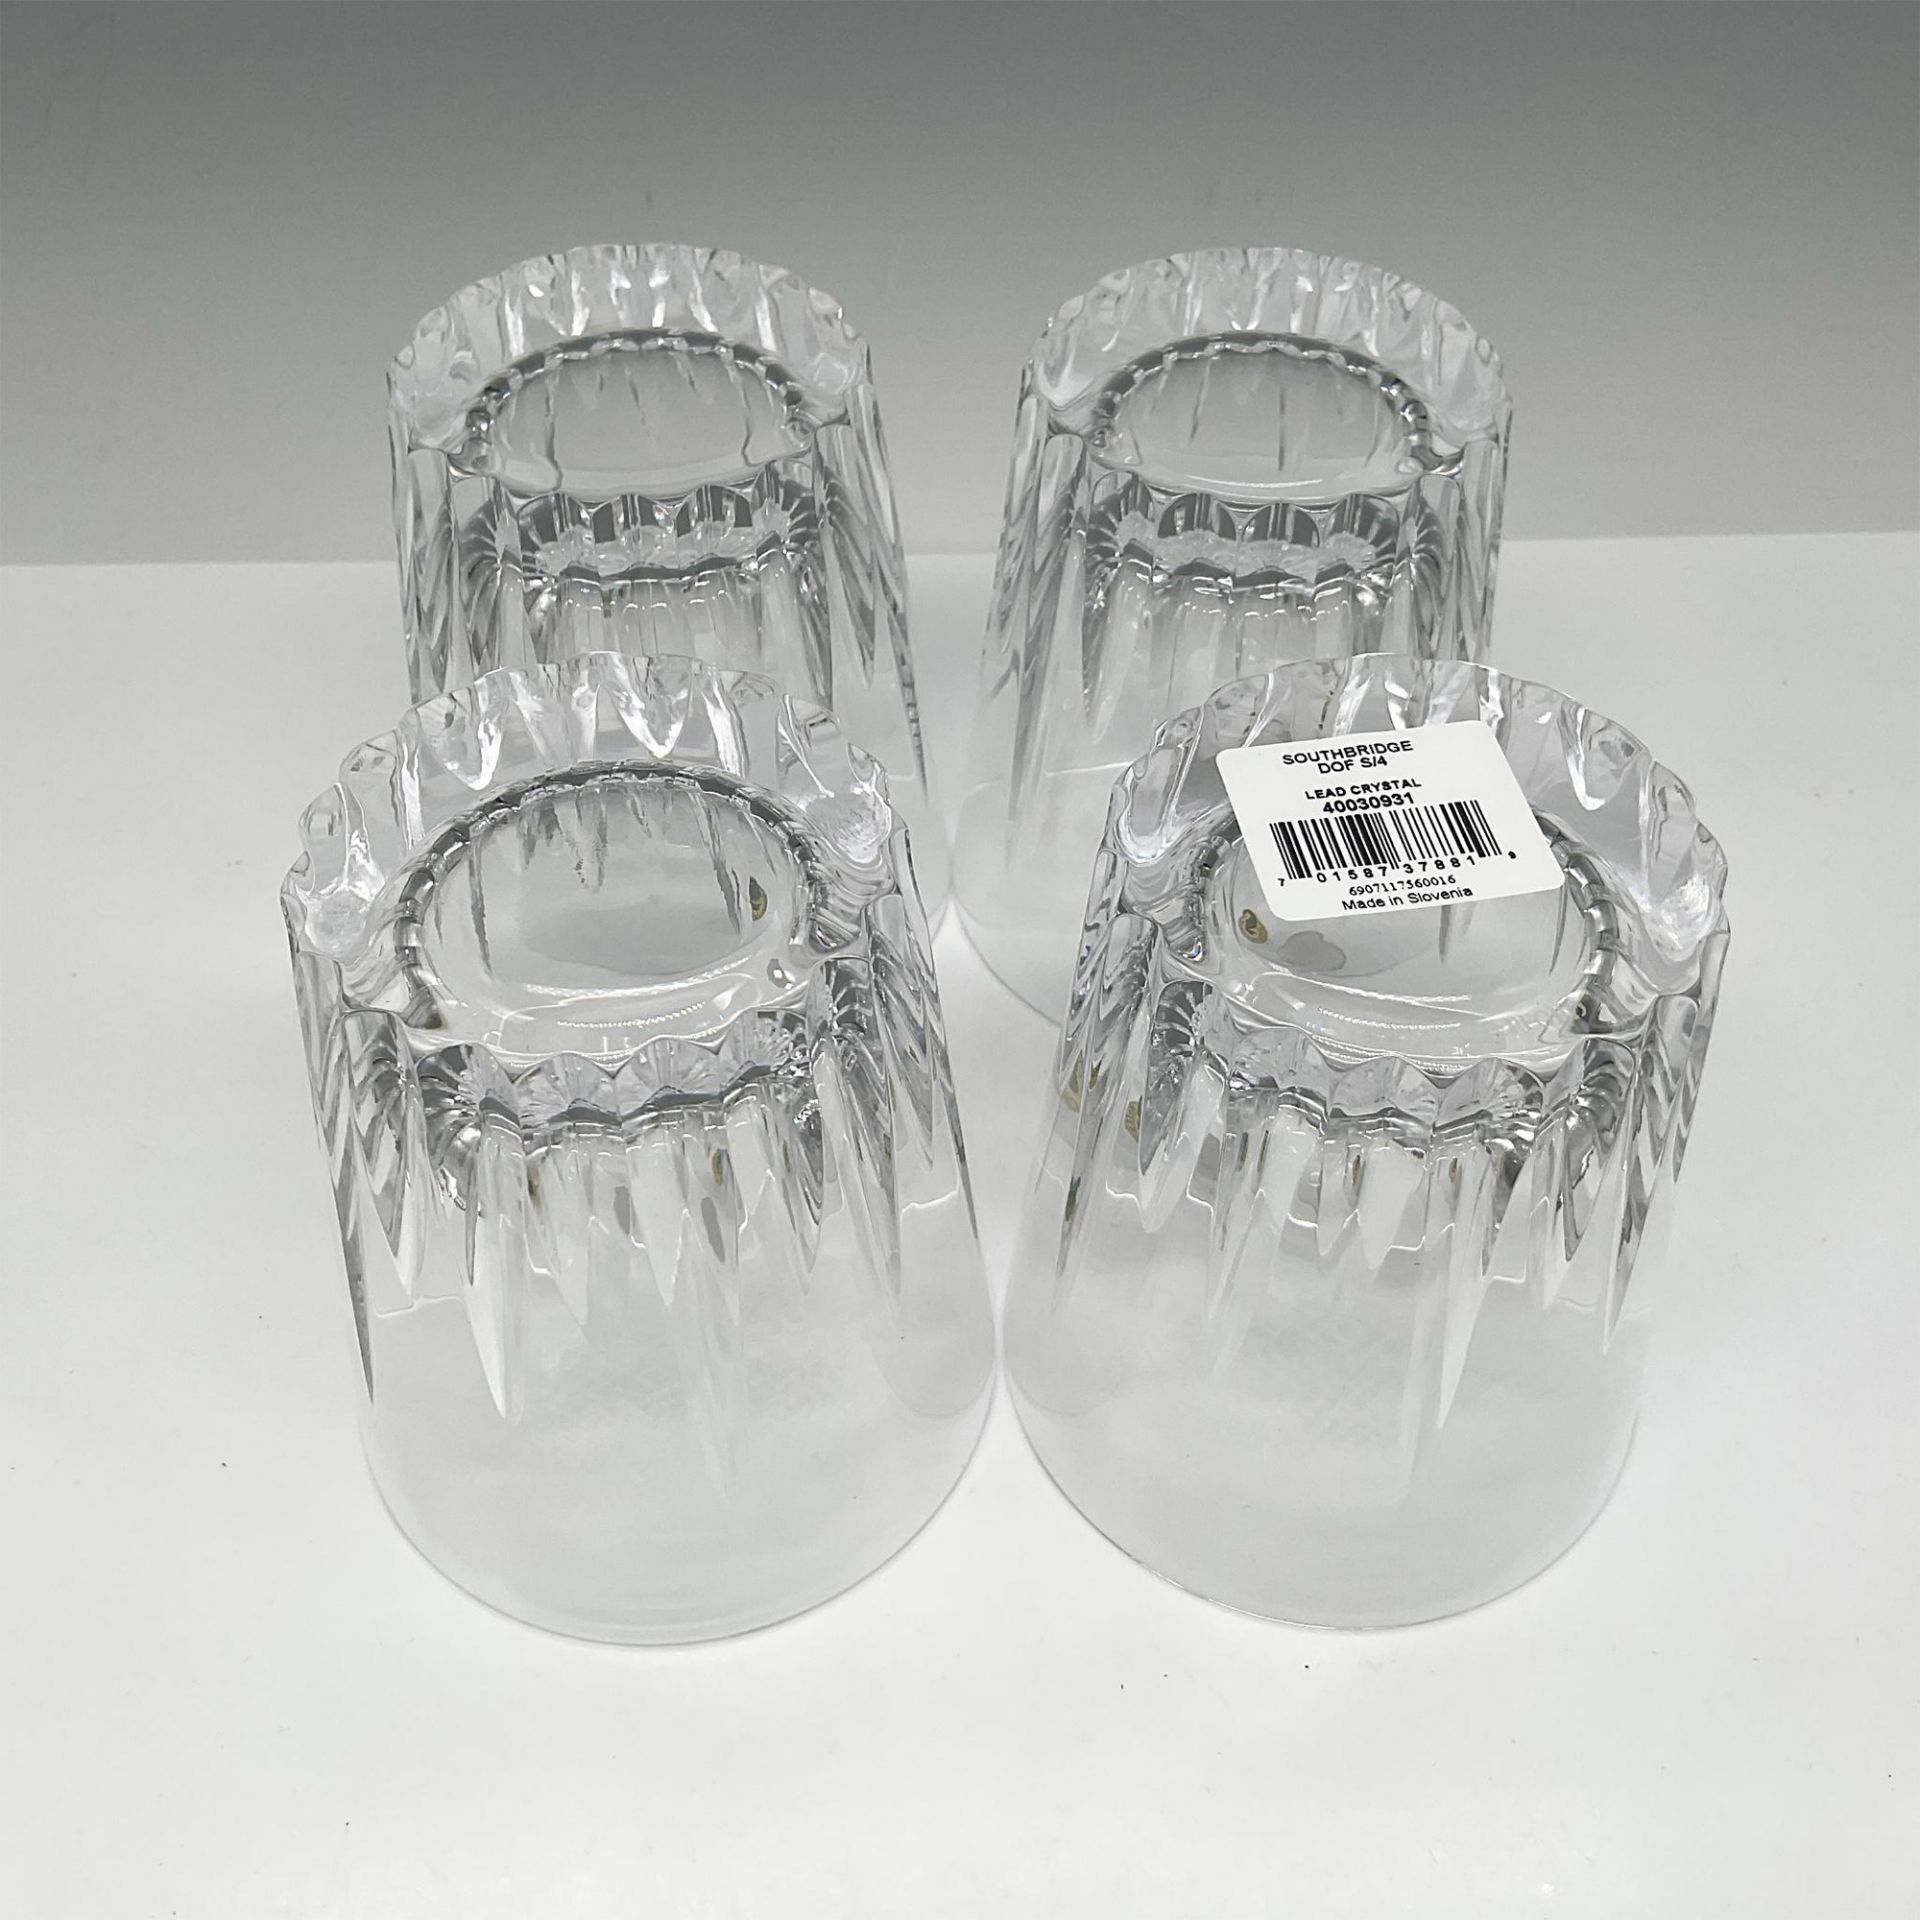 Waterford Crystal Southbridge Tumblers, Set of 4 - Image 3 of 4